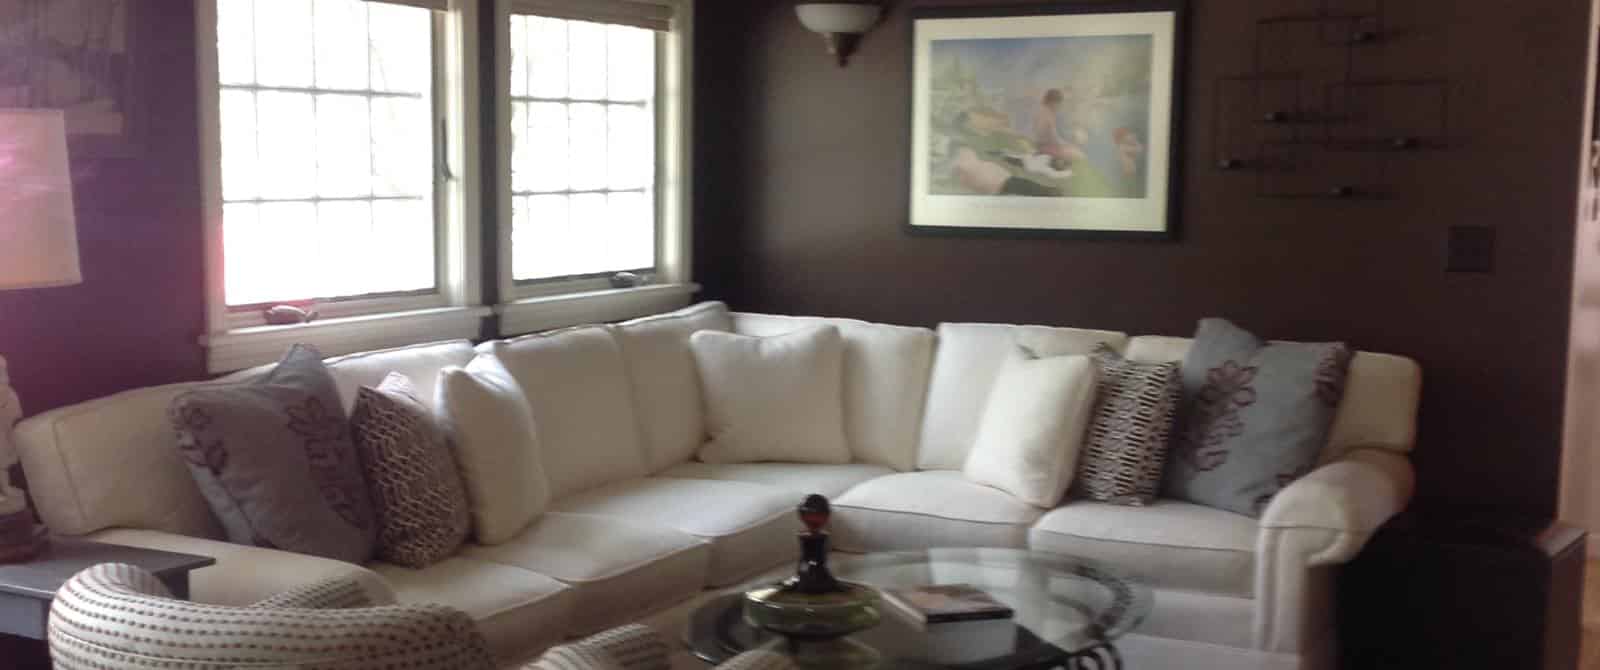 Gathering area with dark walls, hardwood flooring, large white sectional, glass coffee table, and two upholstered chairs